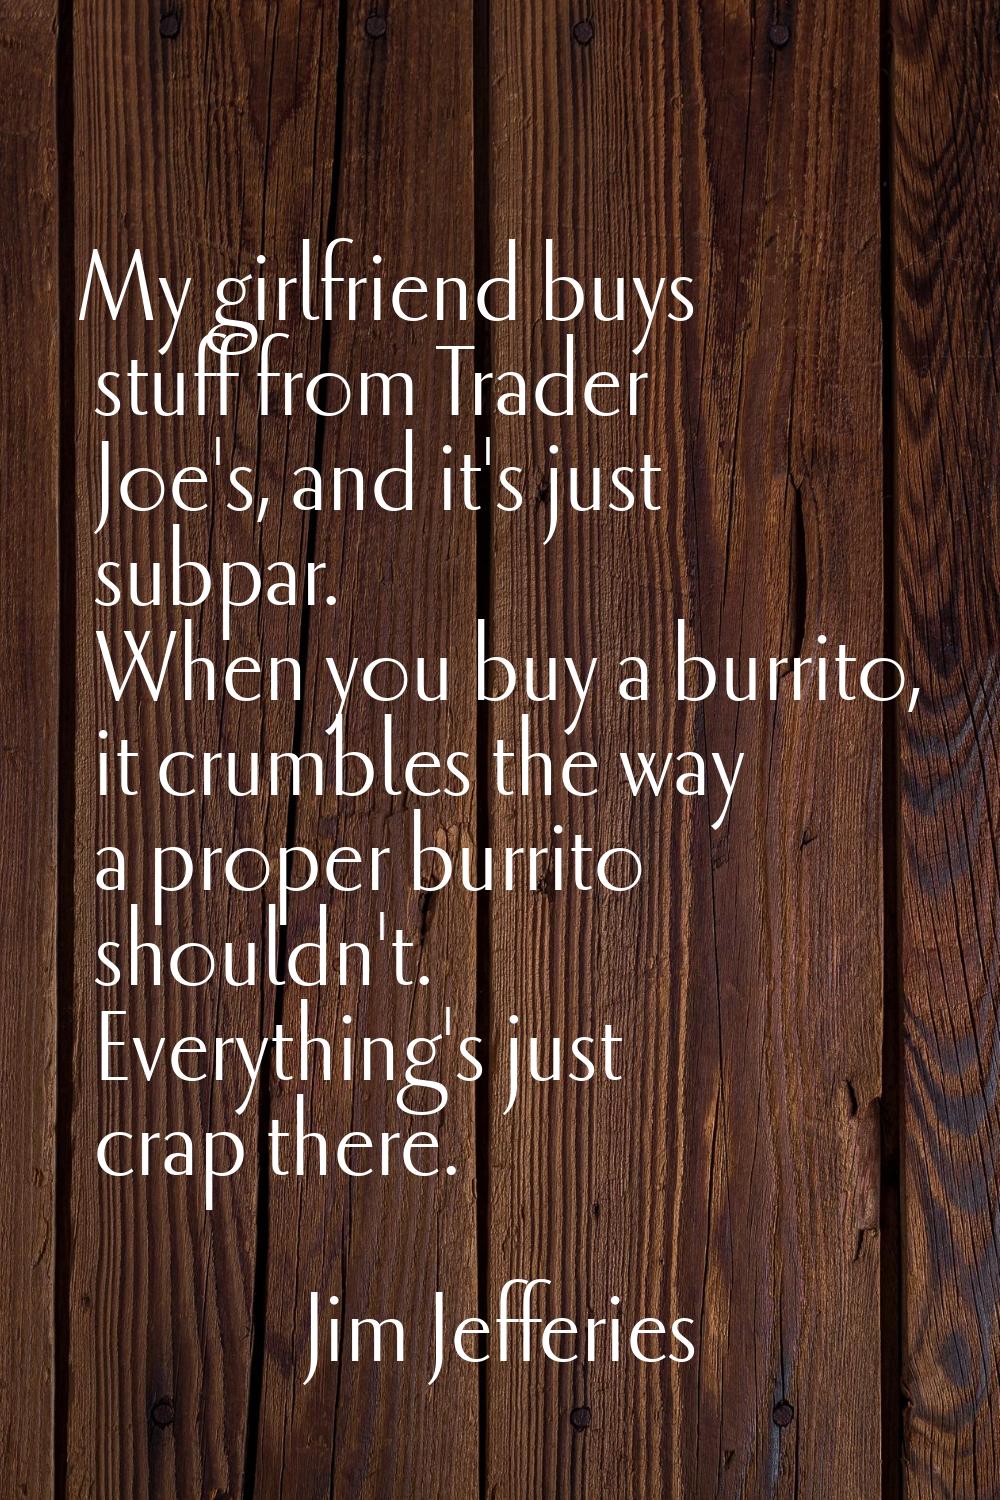 My girlfriend buys stuff from Trader Joe's, and it's just subpar. When you buy a burrito, it crumbl